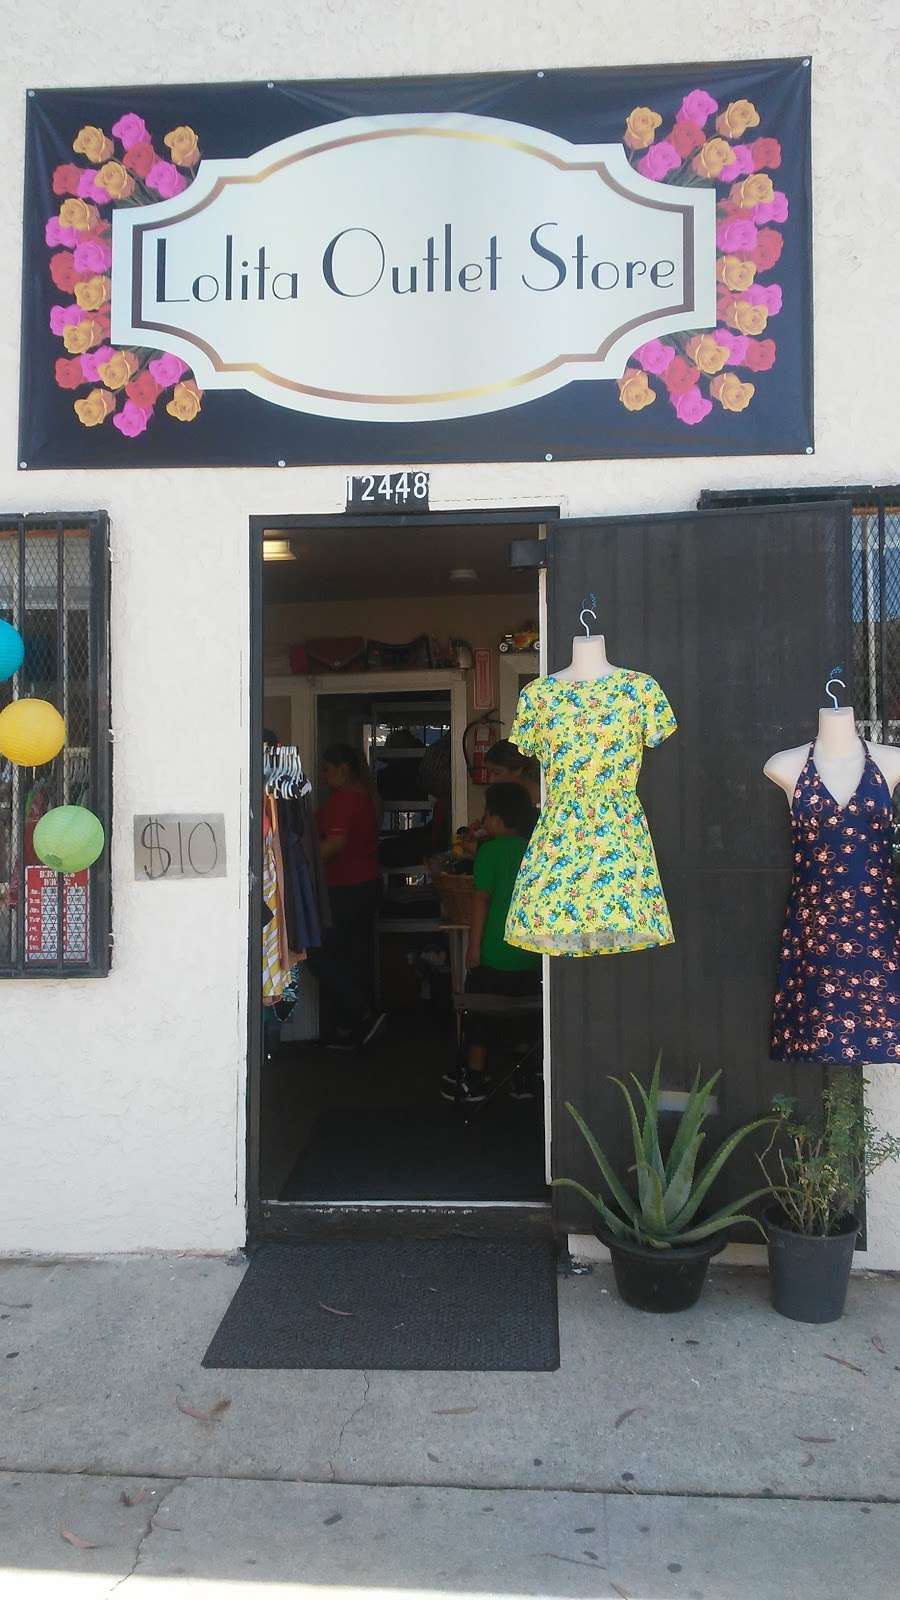 Lolitas Outlet Store | 12448 Atlantic Ave, Lynwood, CA 90262, USA